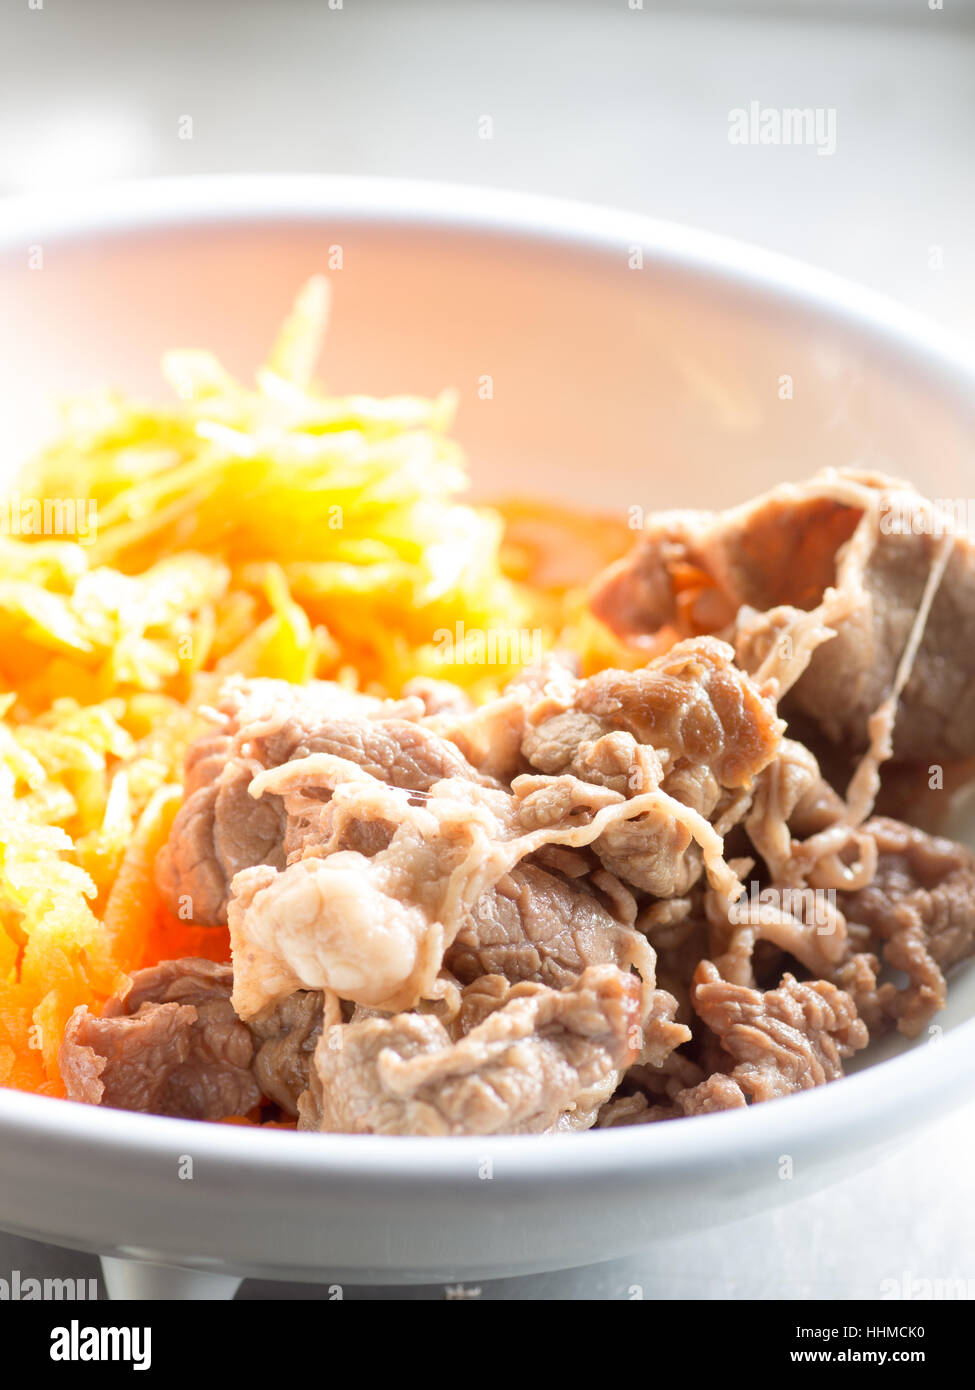 Japanese cuisine, grilled lean beef with shredded carrot salad on the dish Stock Photo